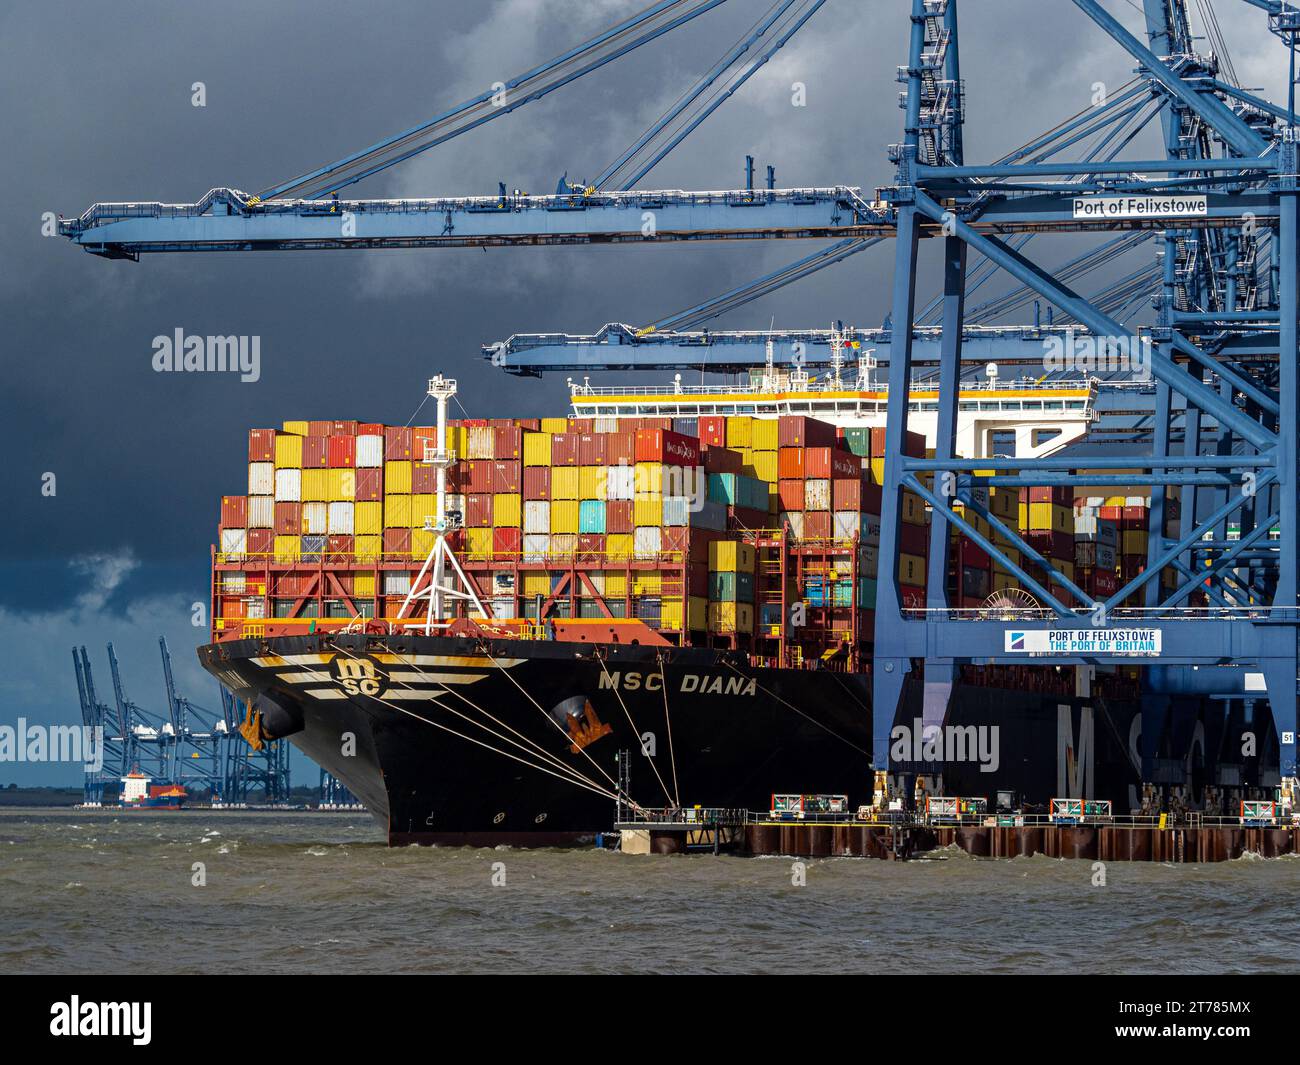 UK Trade. MSC Diana arrives at Felixstowe Port in the UK. Port of Felixstowe Container Port. Stock Photo